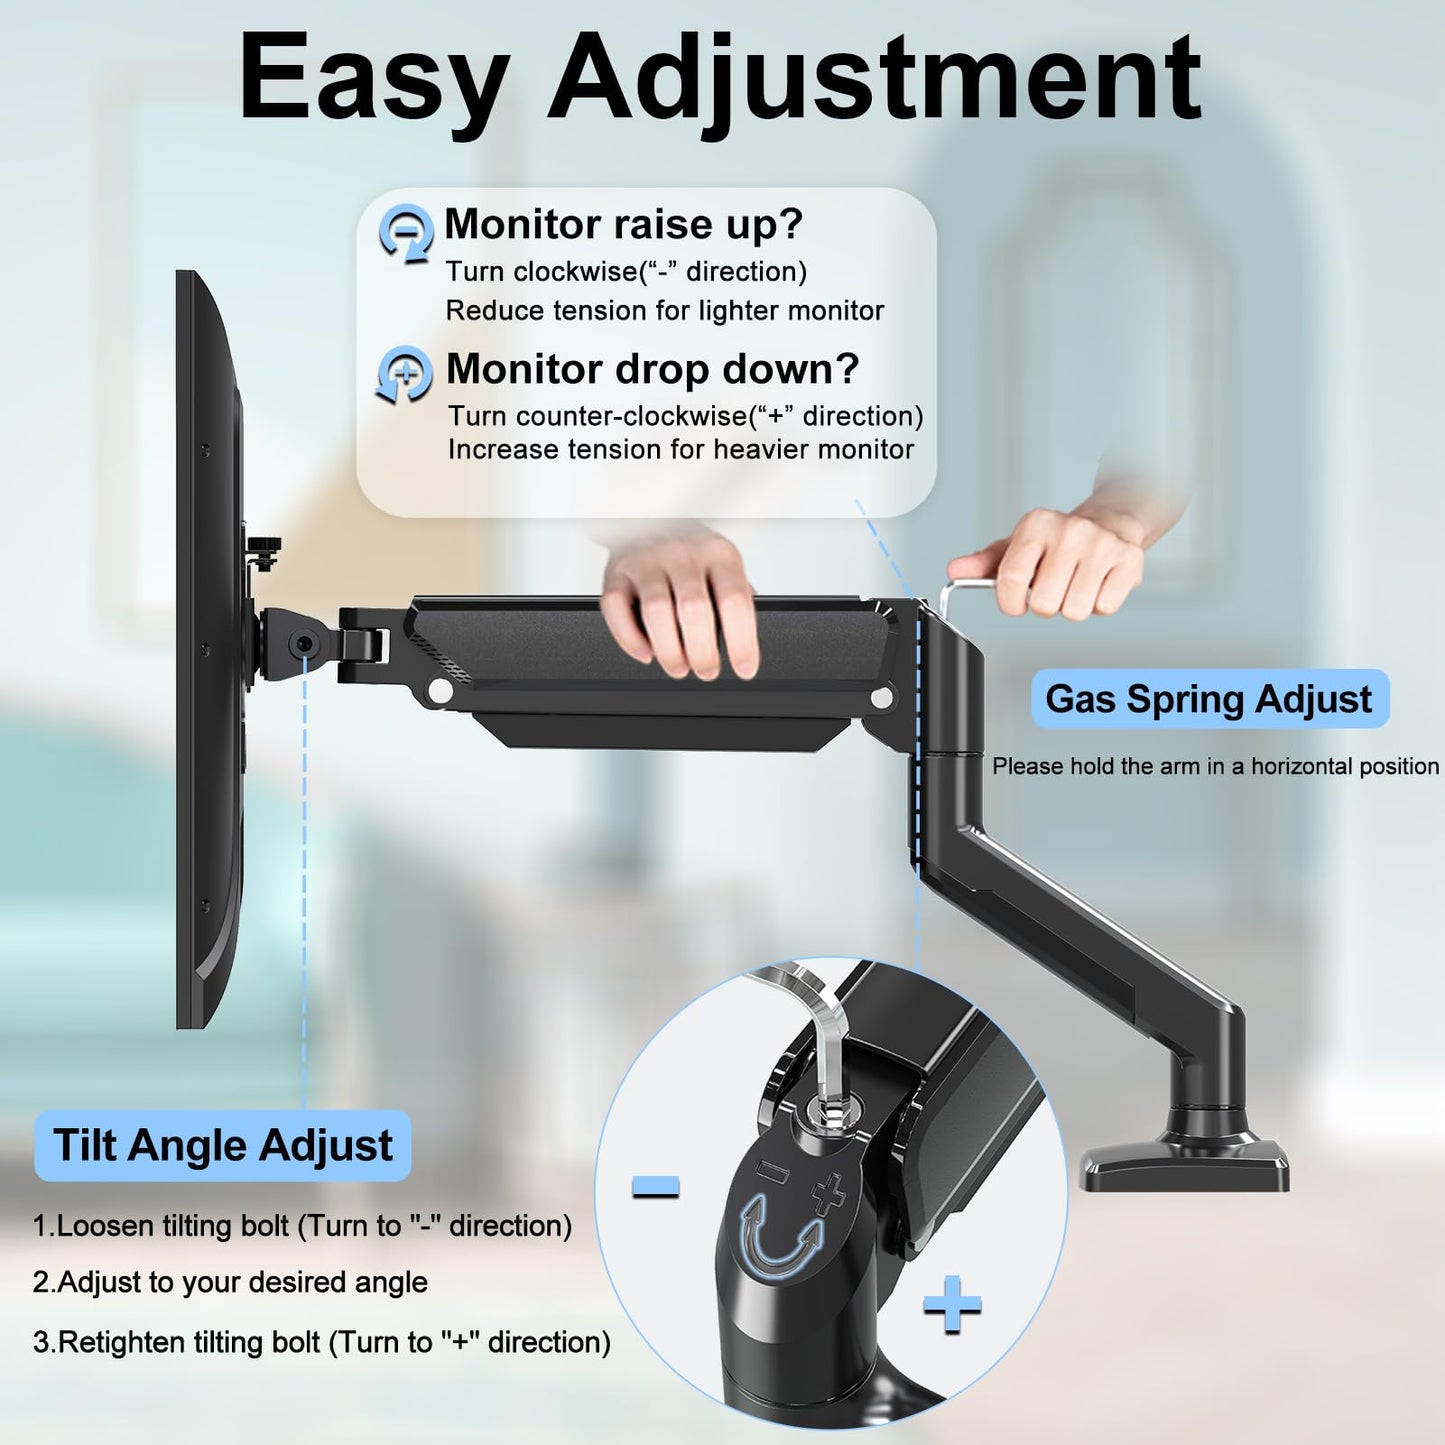 ErgoFocus Dual Monitor Mount Fits 13 to 32 Inch Computer Screen, Dual Monitor Arm Hold up to 19.8lbs Each, Full Motion Monitor Desk Mounts for 2 Monitors, Gas Spring Monitor Stand, VESA Mount